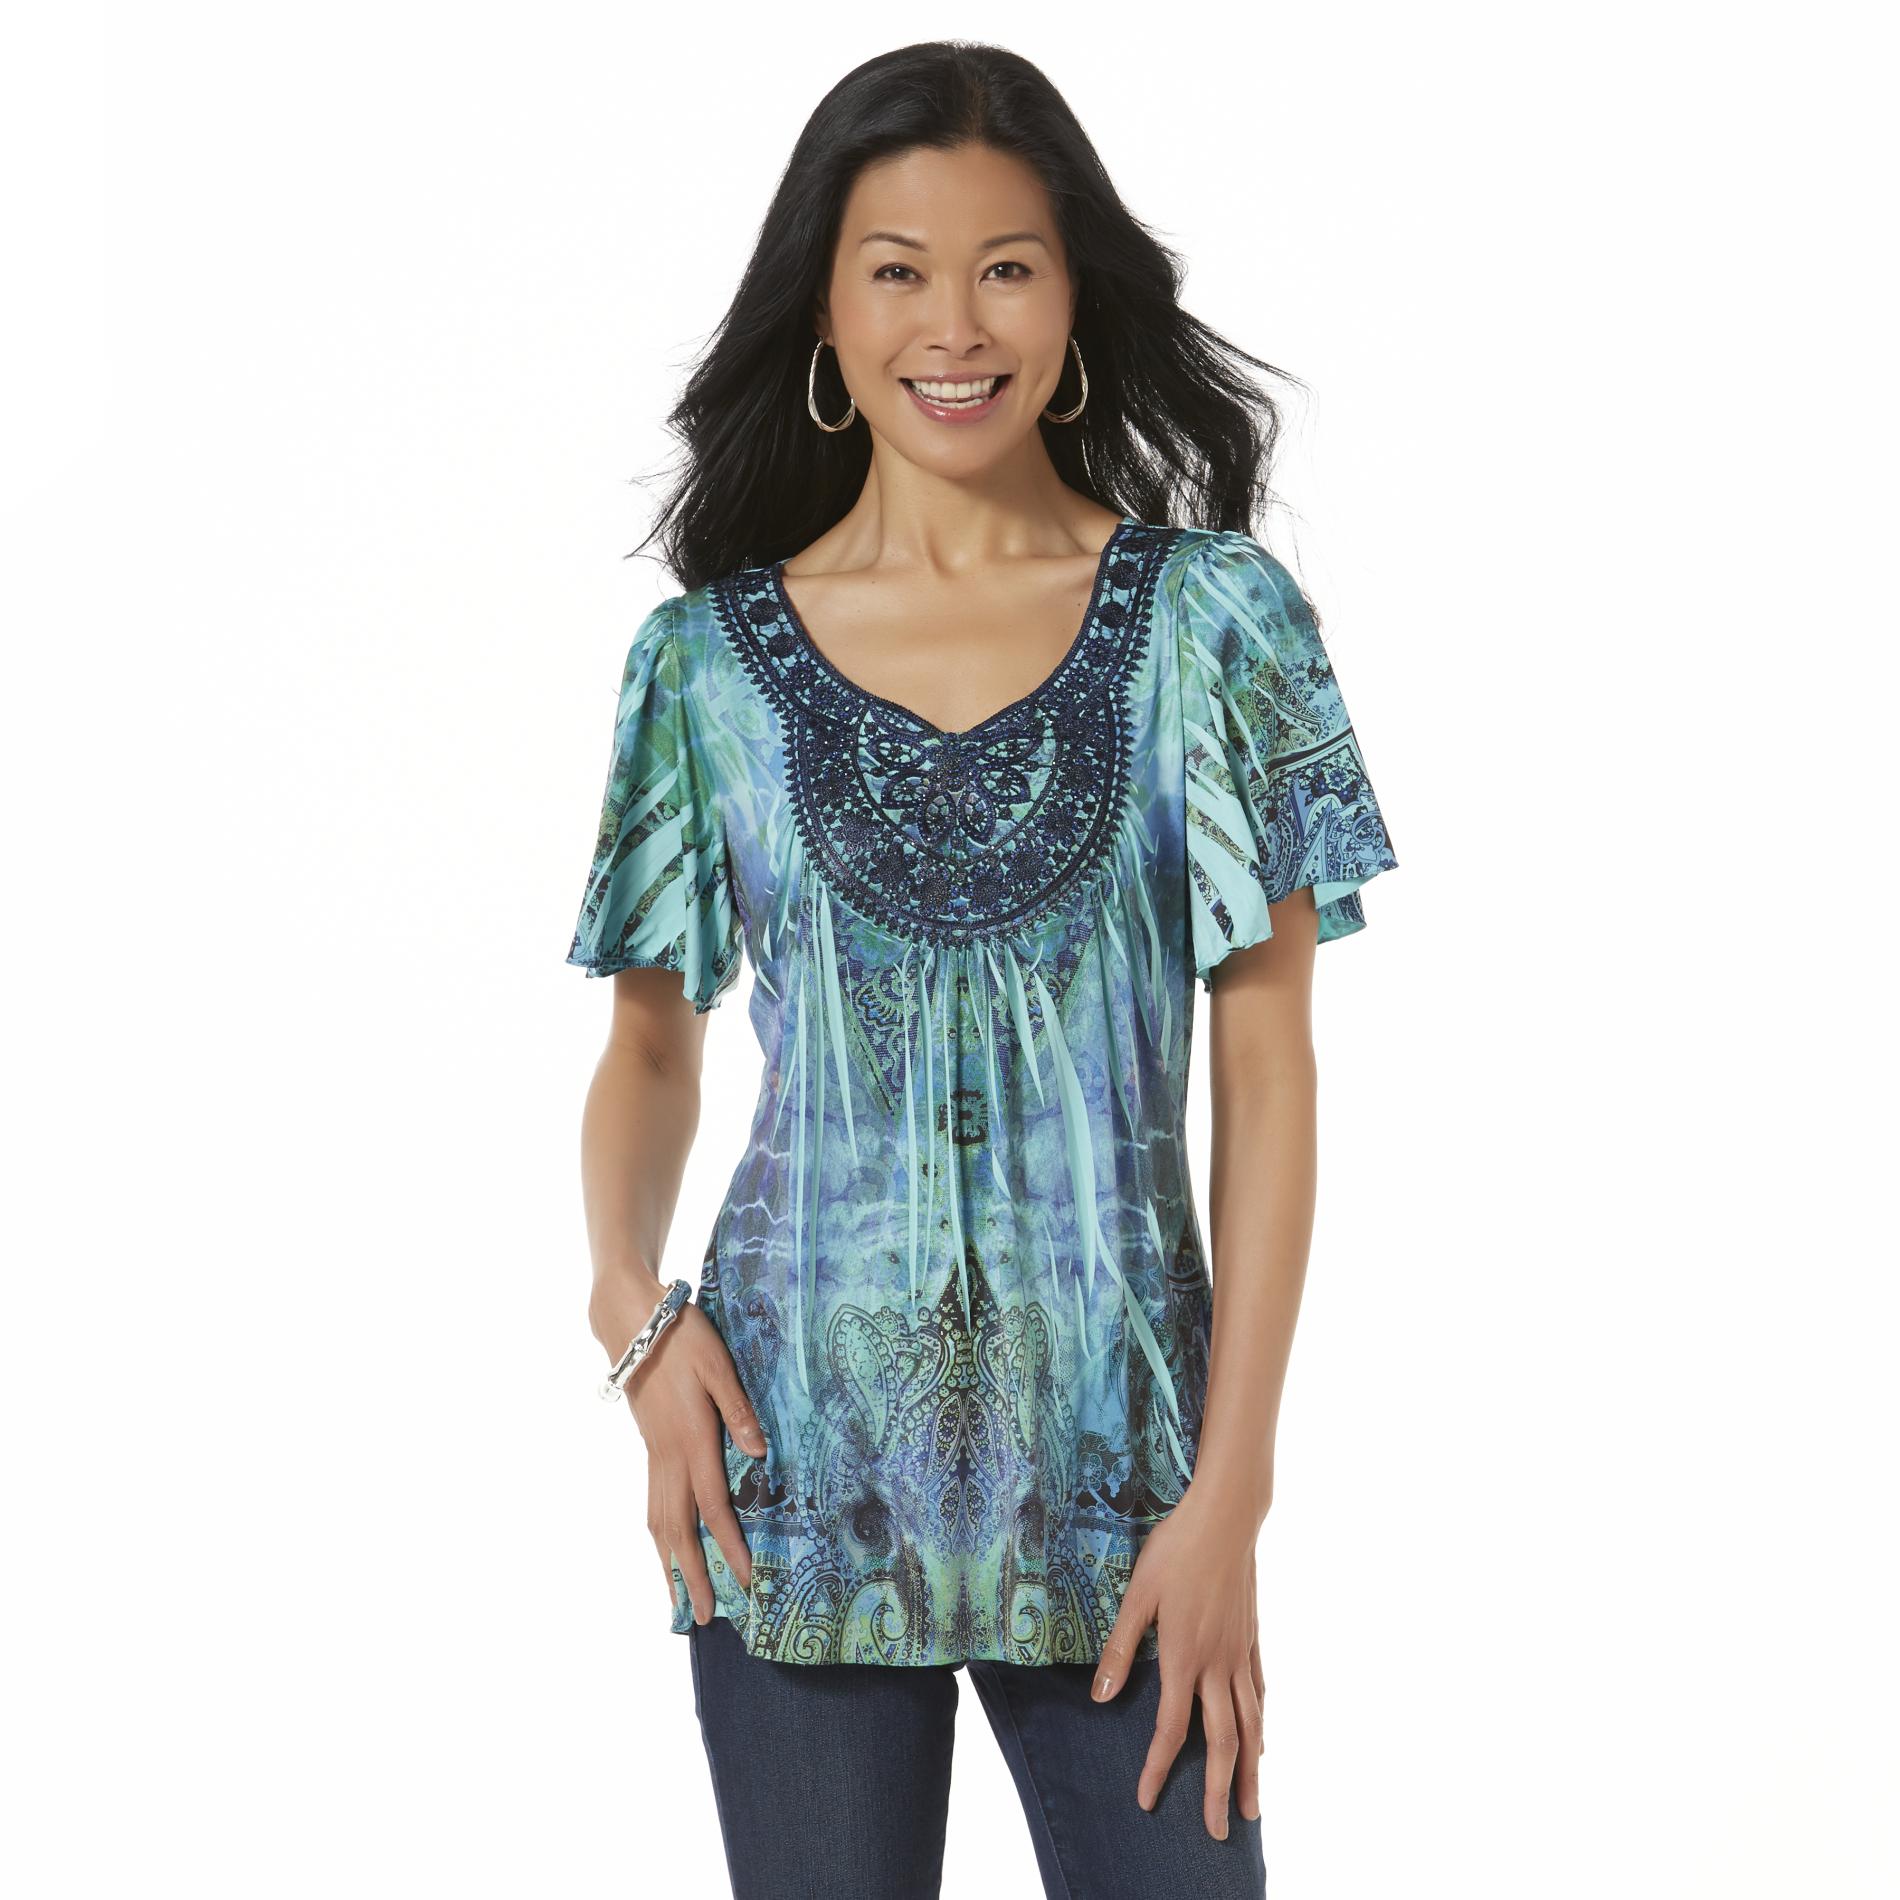 Live and Let Live Women's Embellished Sublimation Top - Abstract Paisley